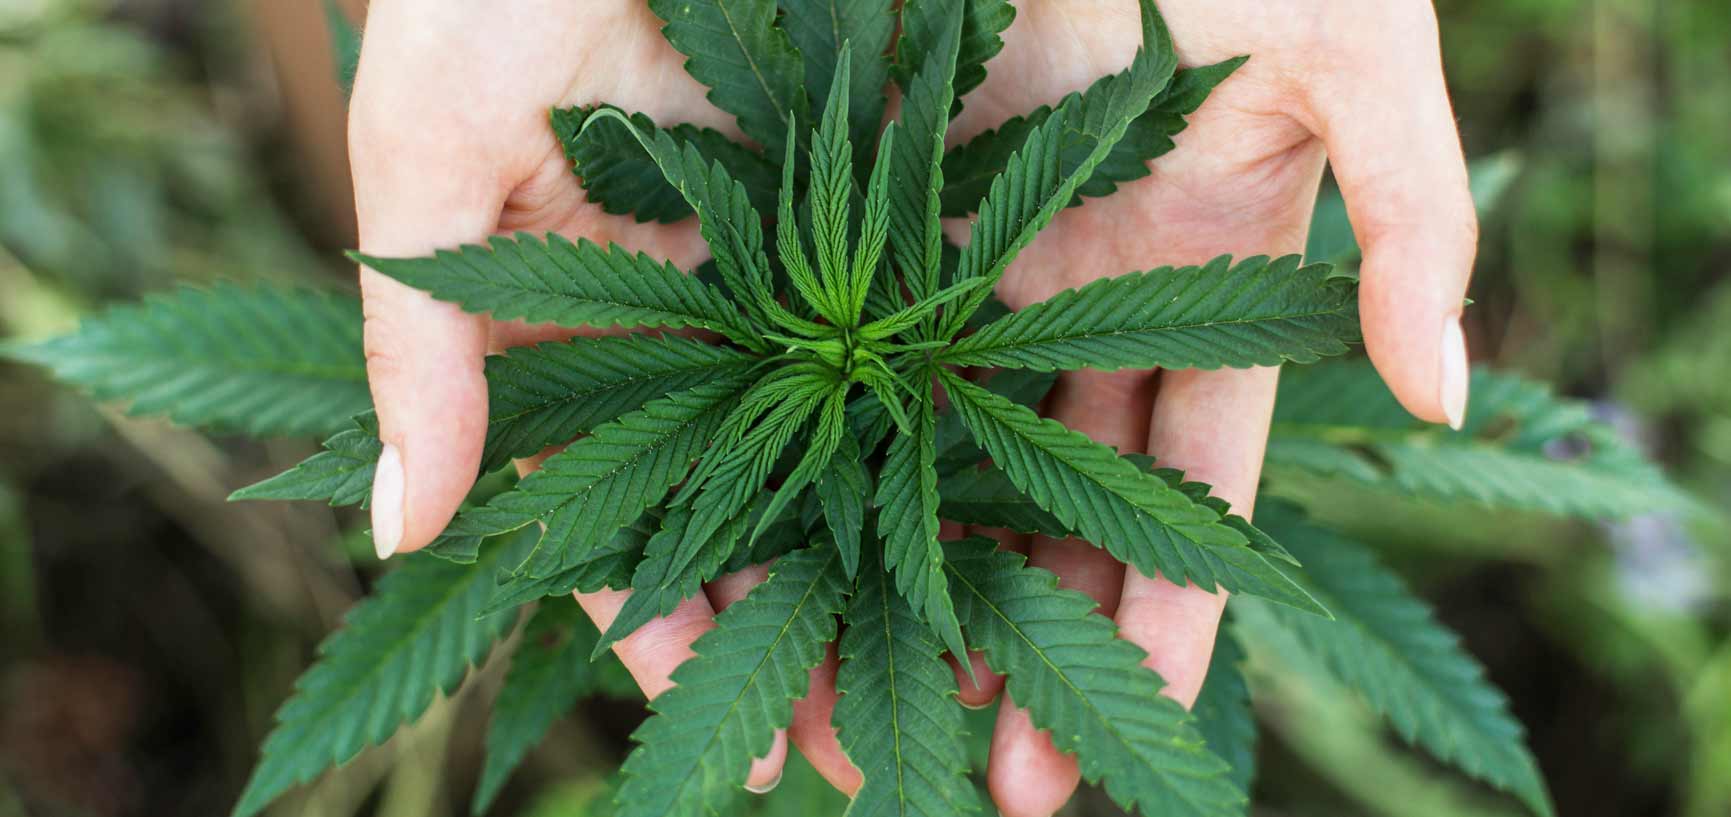 Should You Consider Cannabis For Chronic Pain?